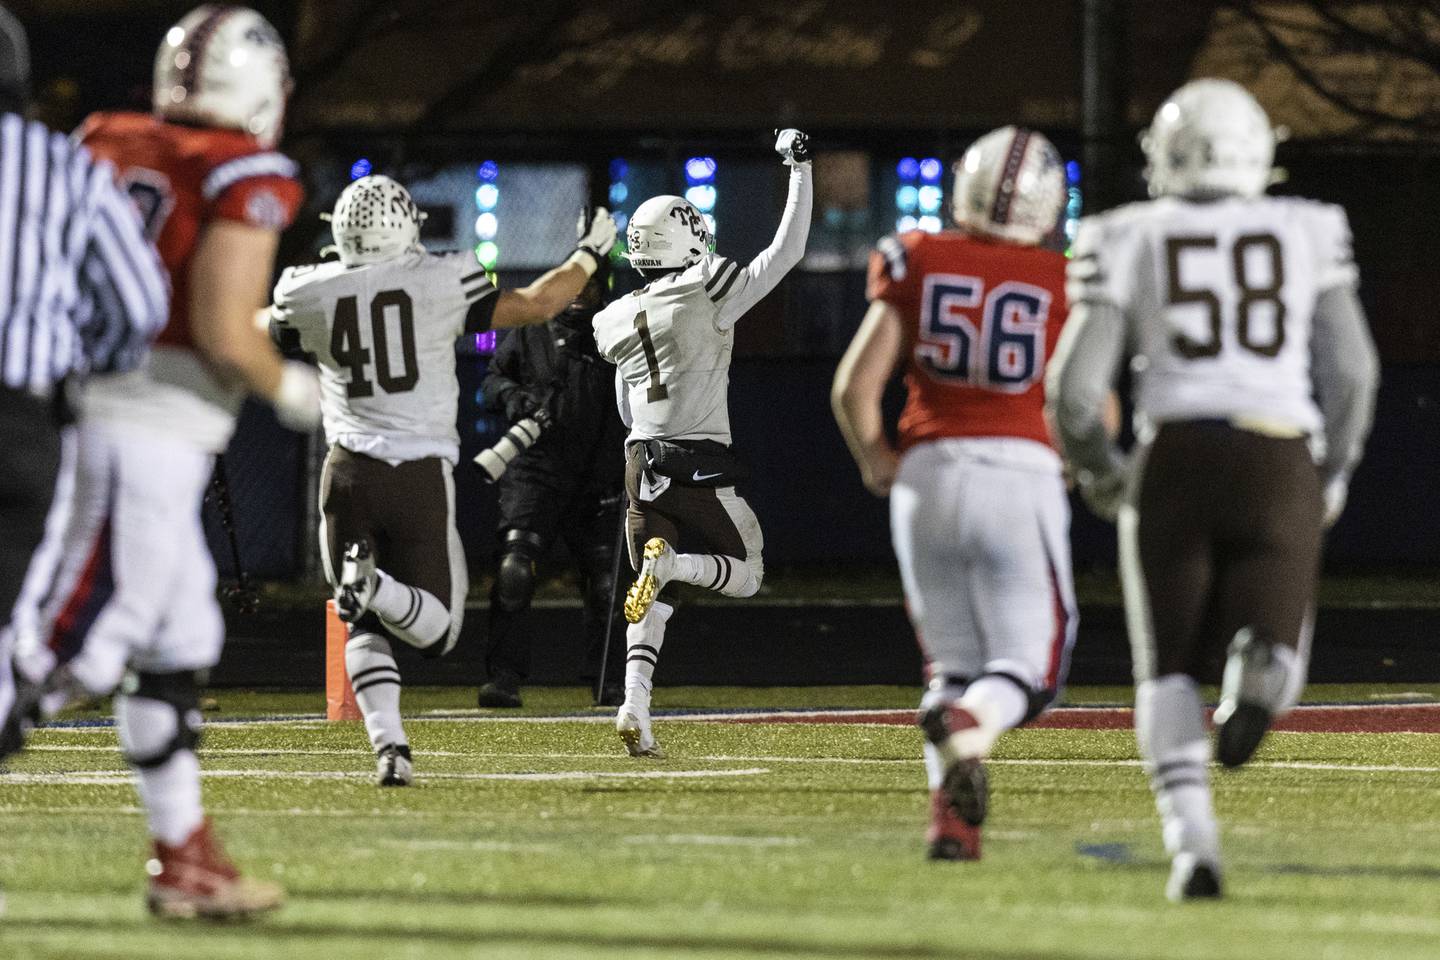 Mount Carmel's Nick Naujokas (40) and Damarion Arrington (1) celebrate as Arrington runs an interception back for a touchdown against St. Rita during a Class 7A state semifinal game in Chicago on Saturday, Nov. 19, 2022.